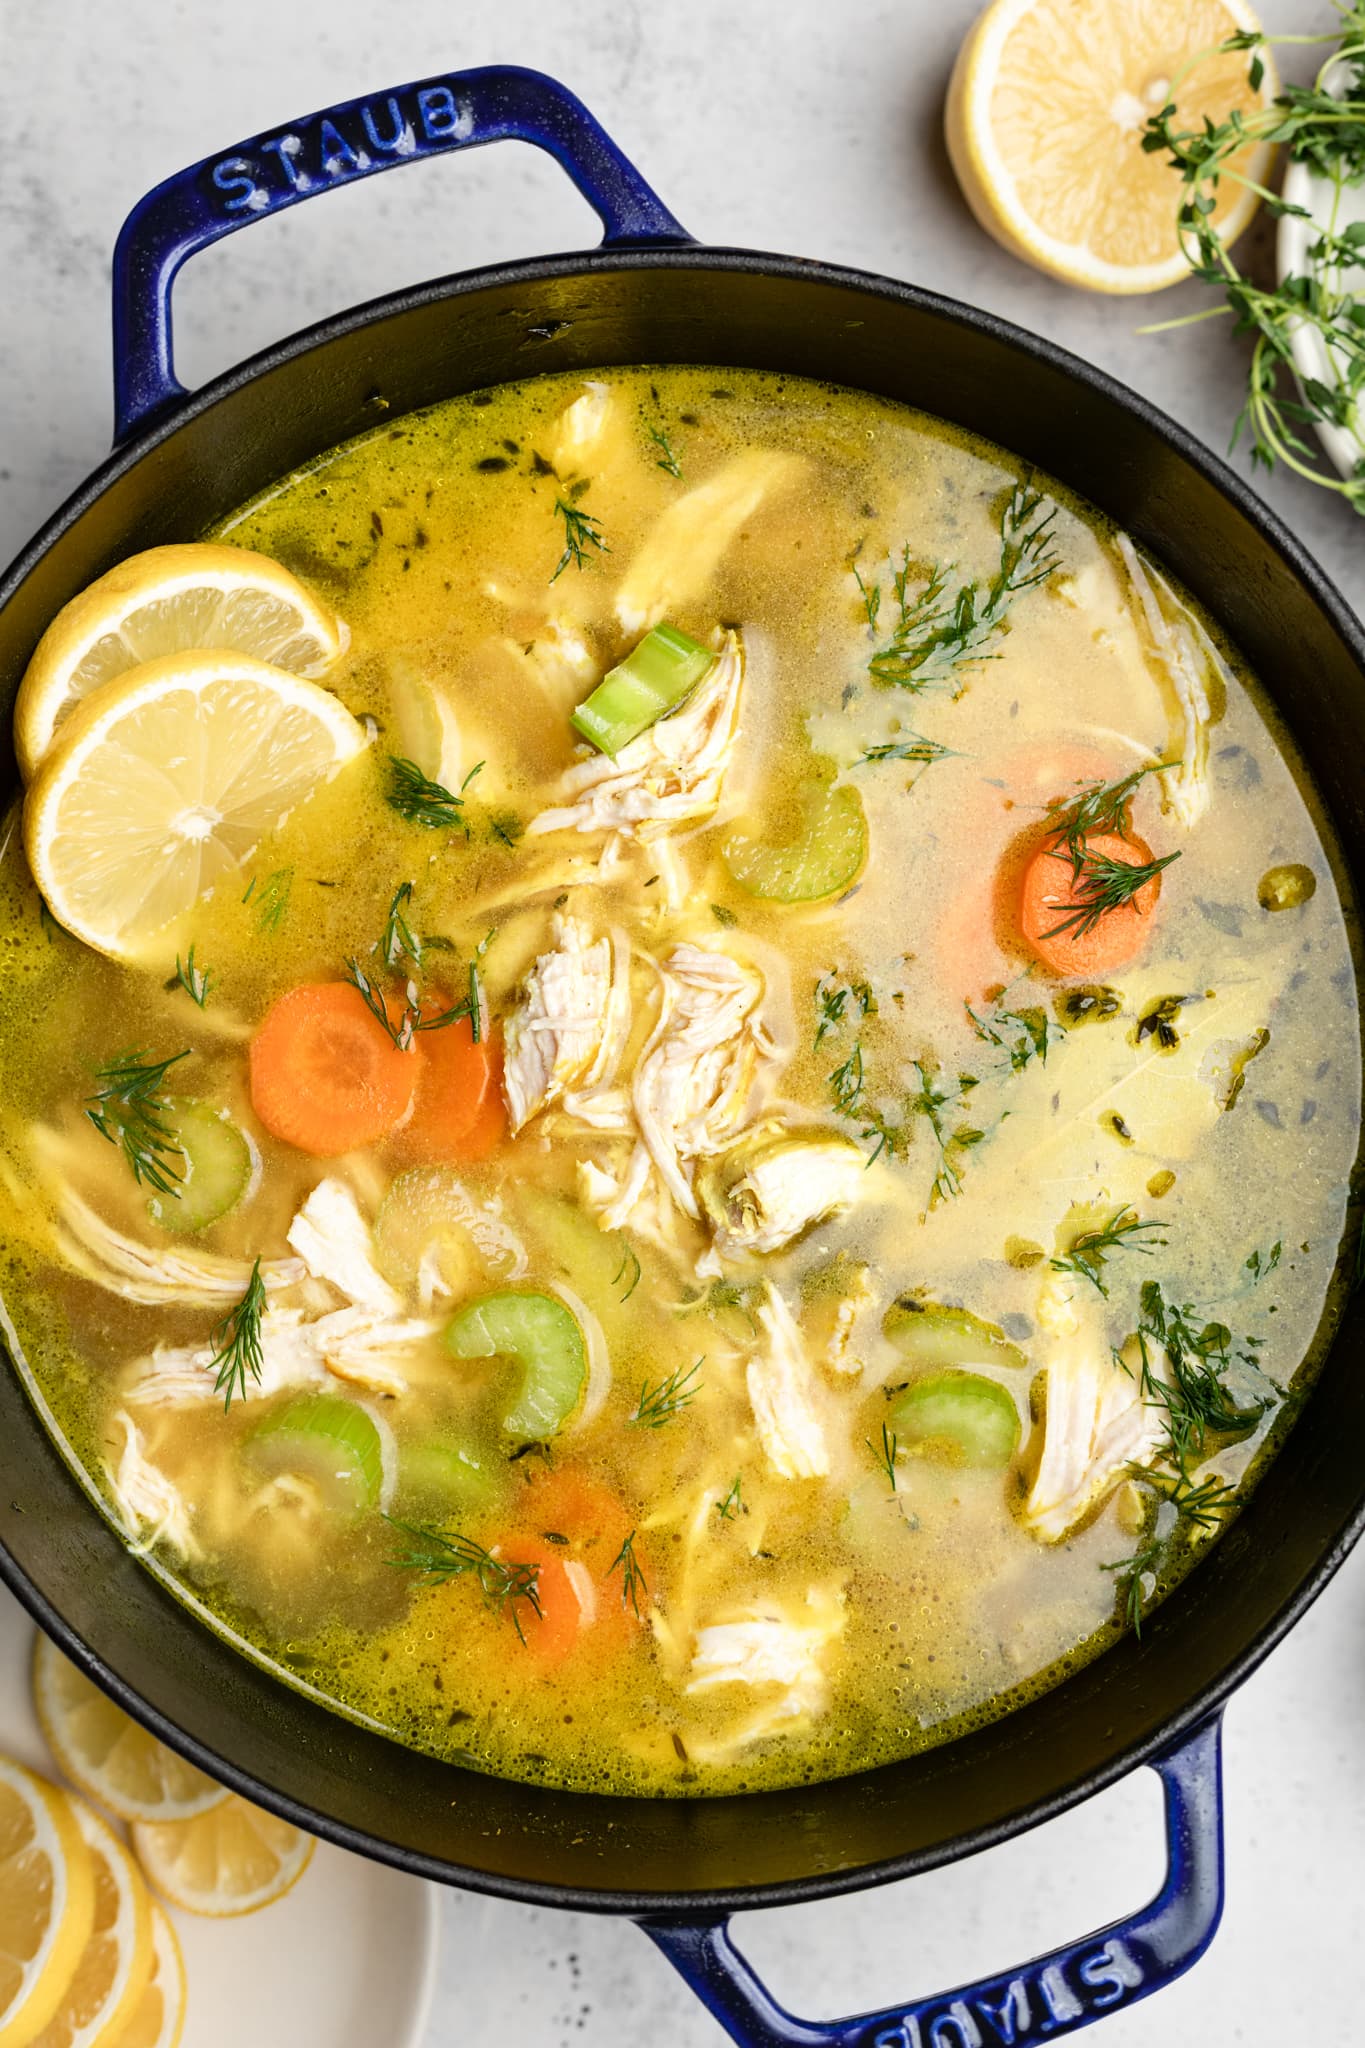 https://allthehealthythings.com/wp-content/uploads/2020/12/healthy-chicken-soup-4.jpg